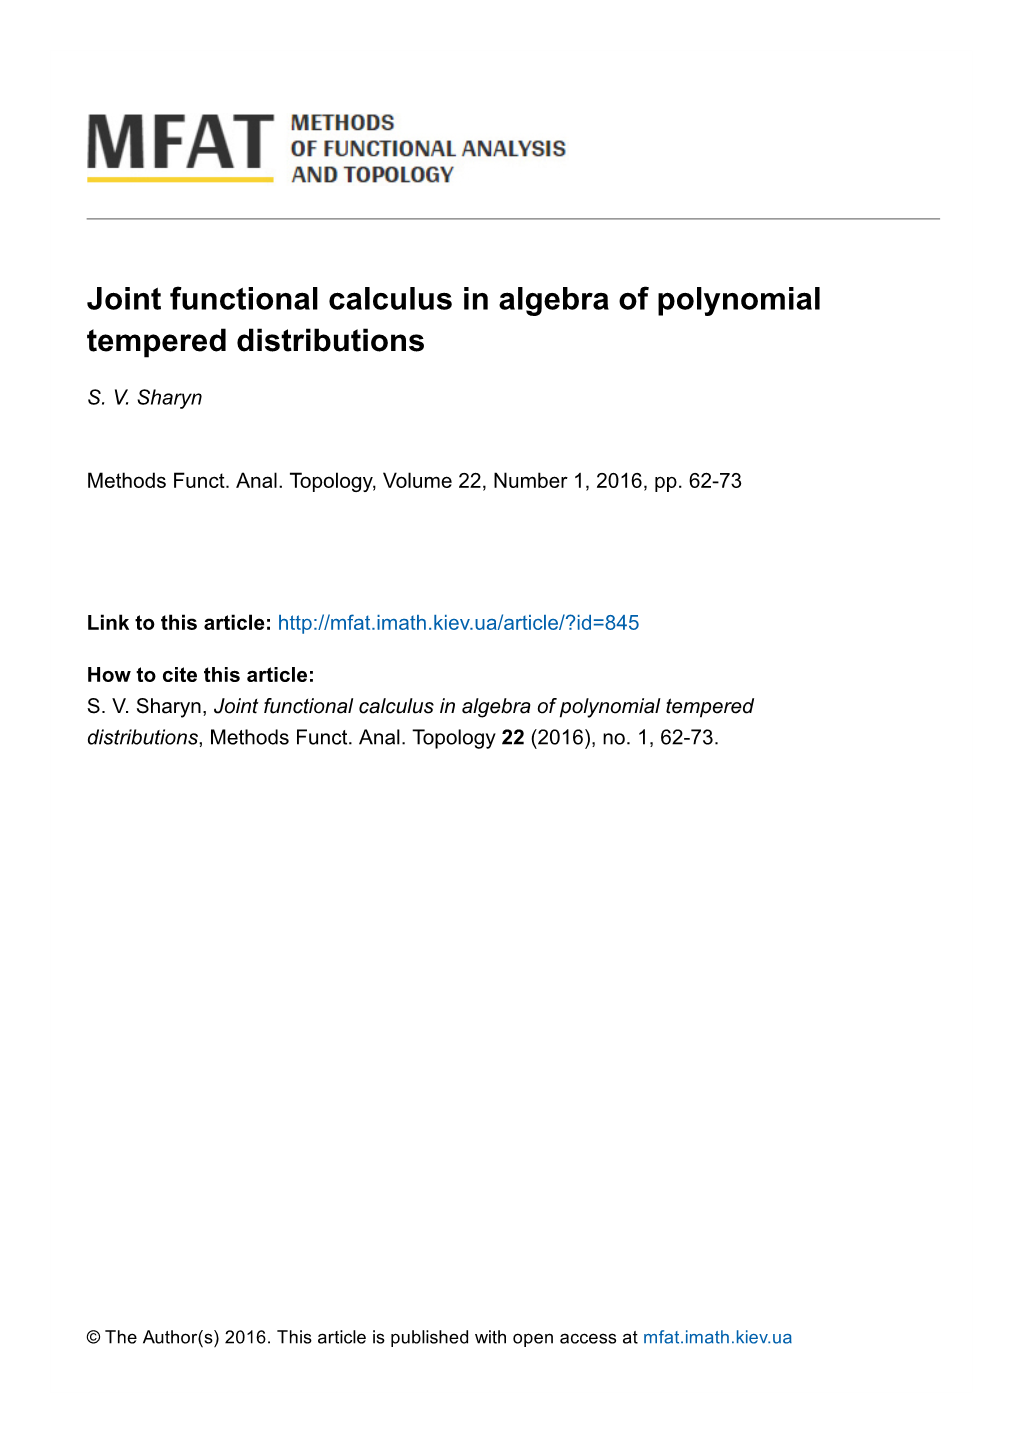 Joint Functional Calculus in Algebra of Polynomial Tempered Distributions